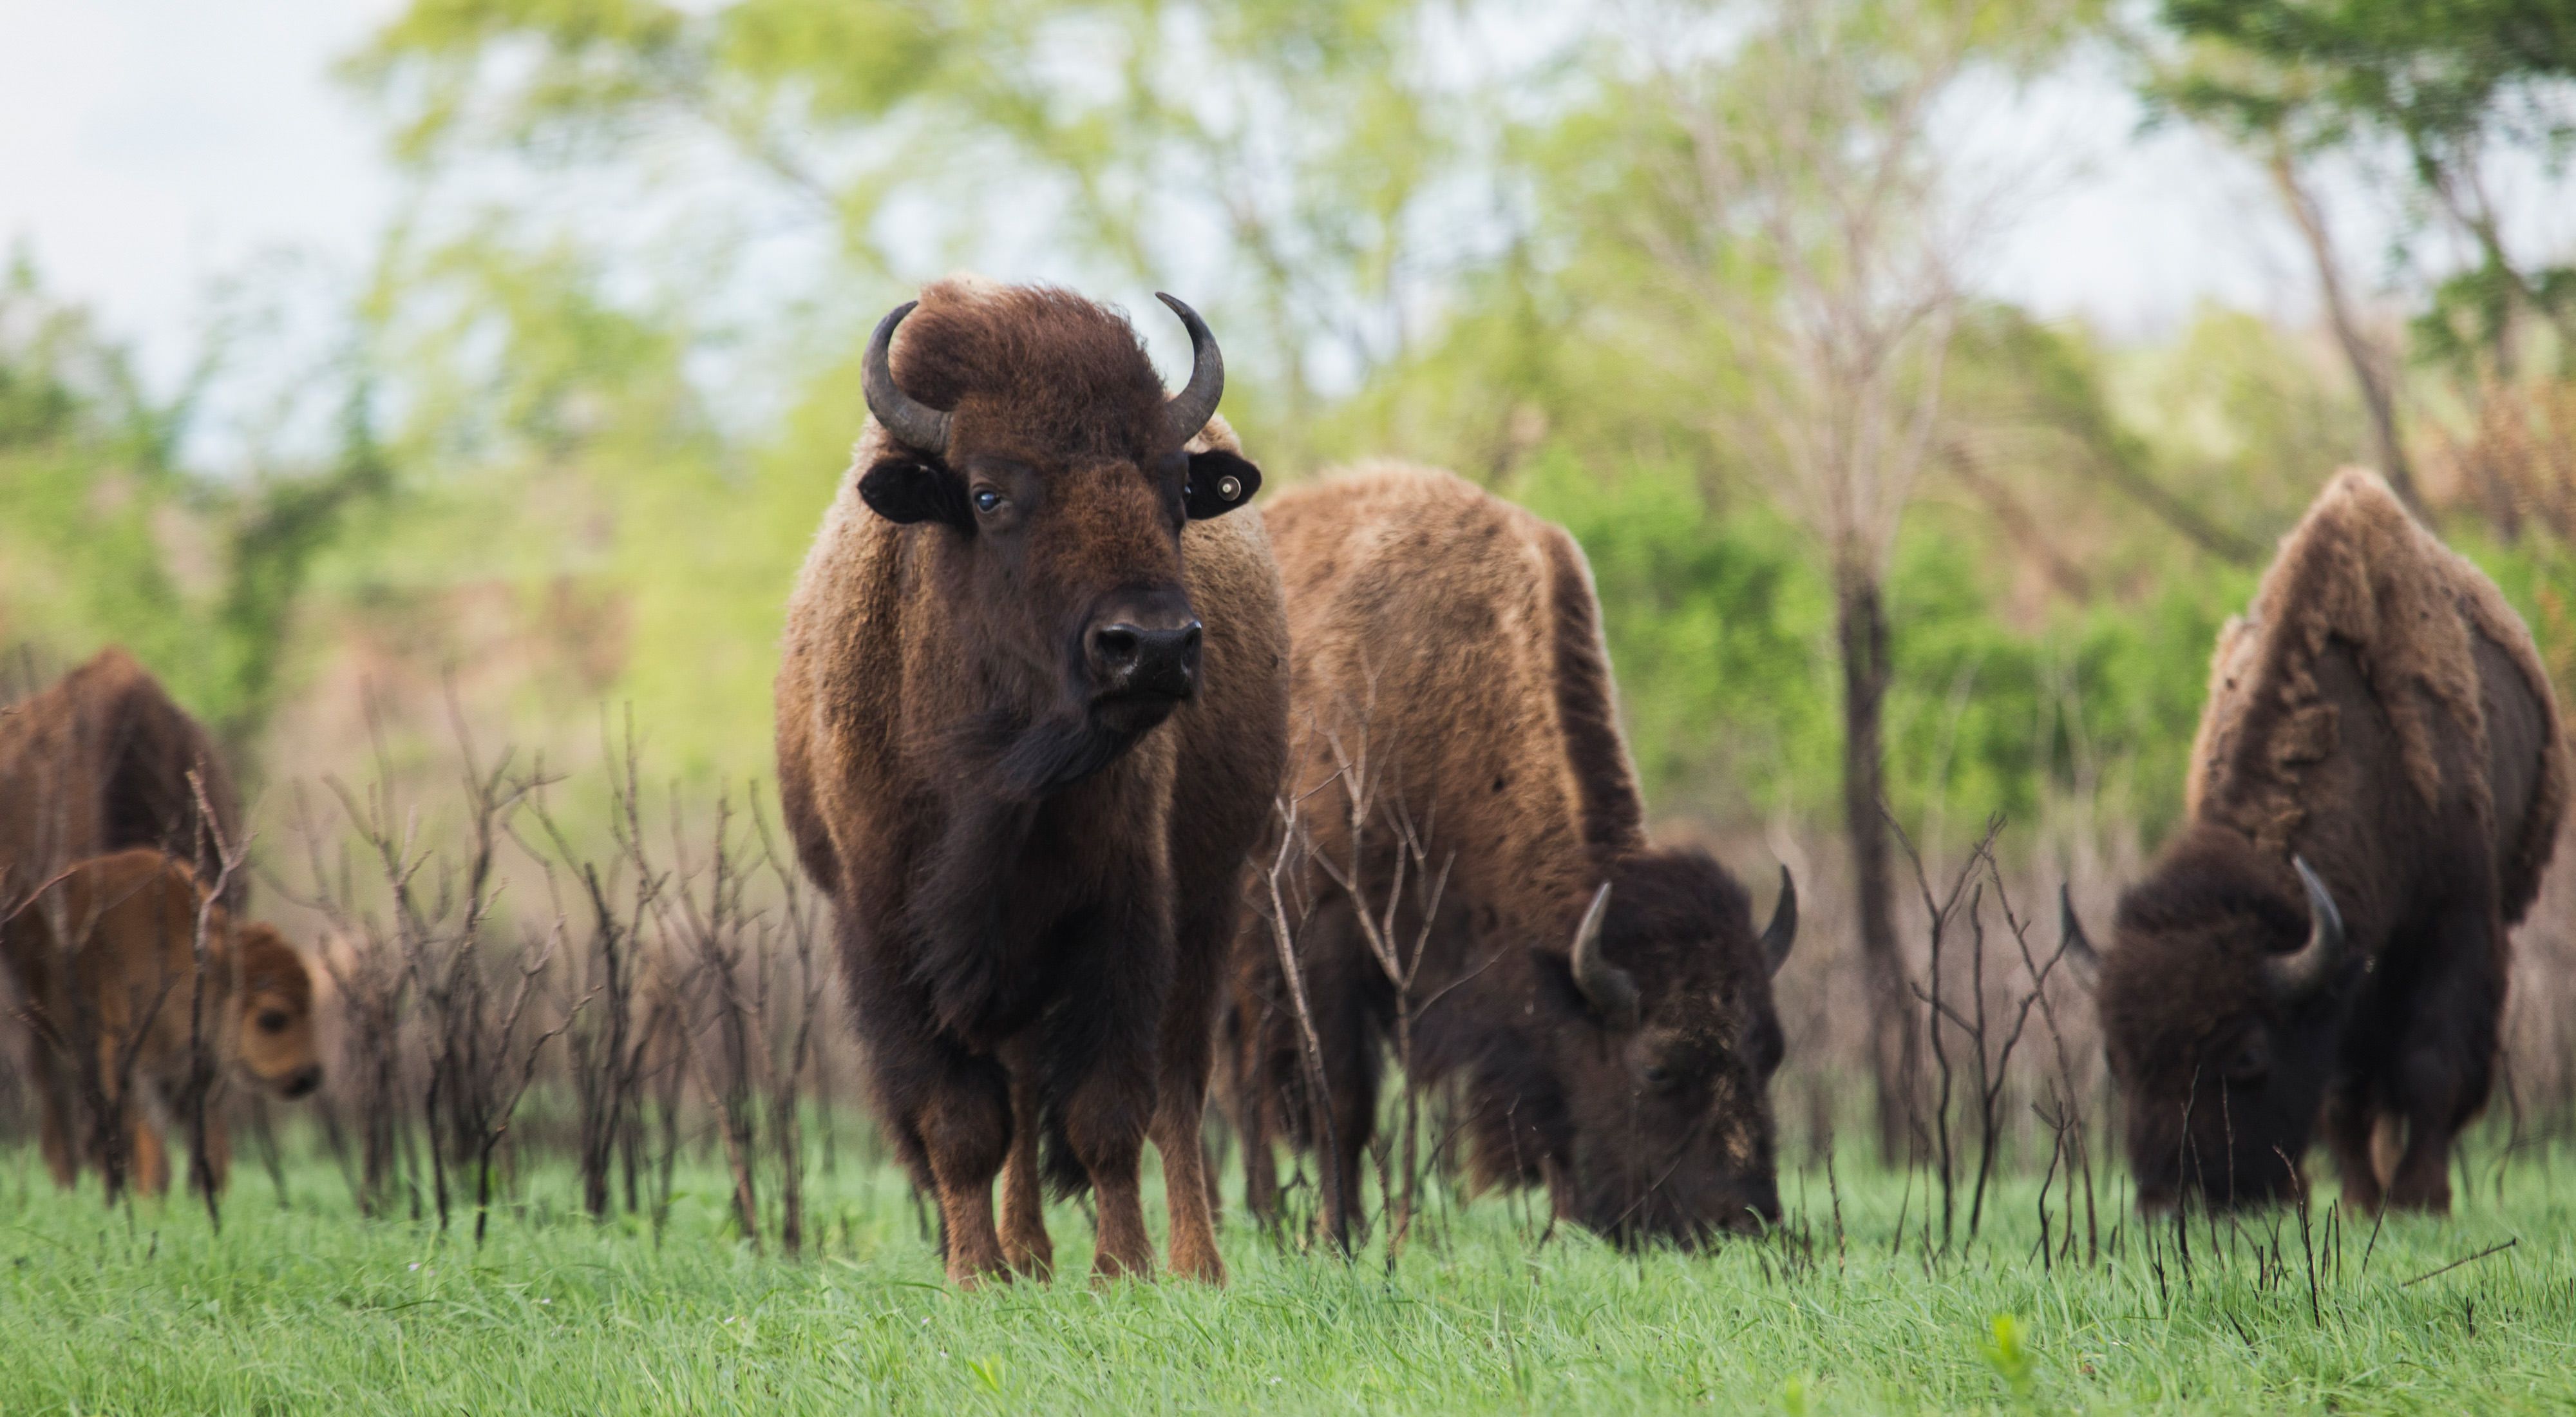 Three large bison grazing in green grass, with a baby bison in the background.